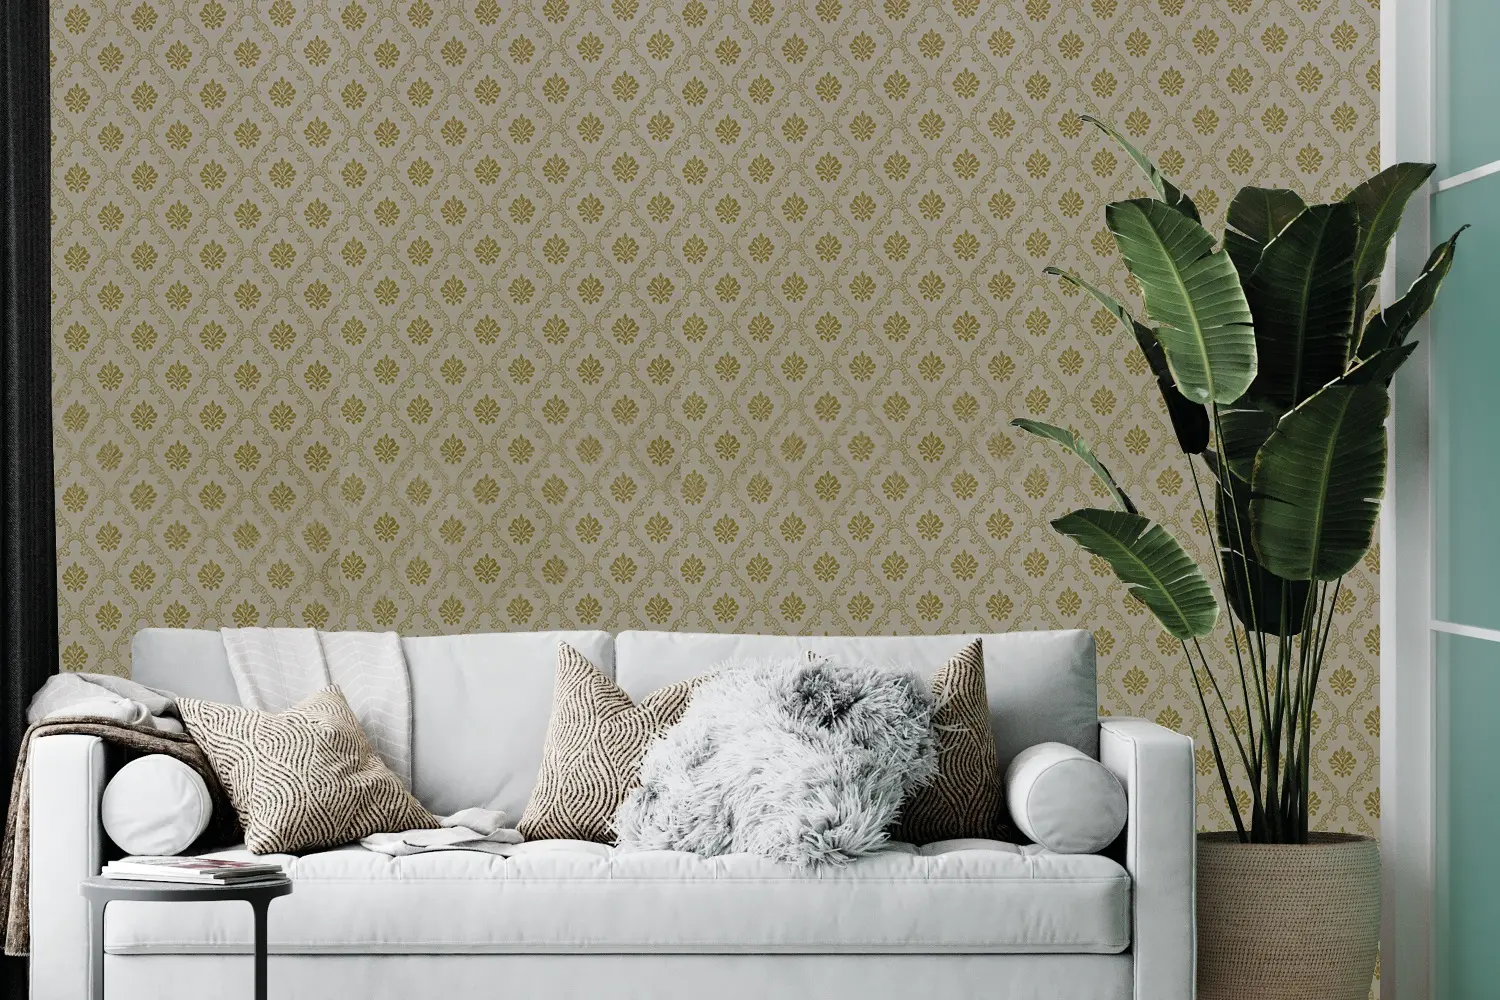 New Style Wall Paper Sticker Home Decor New Design Wallpaper PVC Covering   China Wall Paper 3D Wallpaper  MadeinChinacom